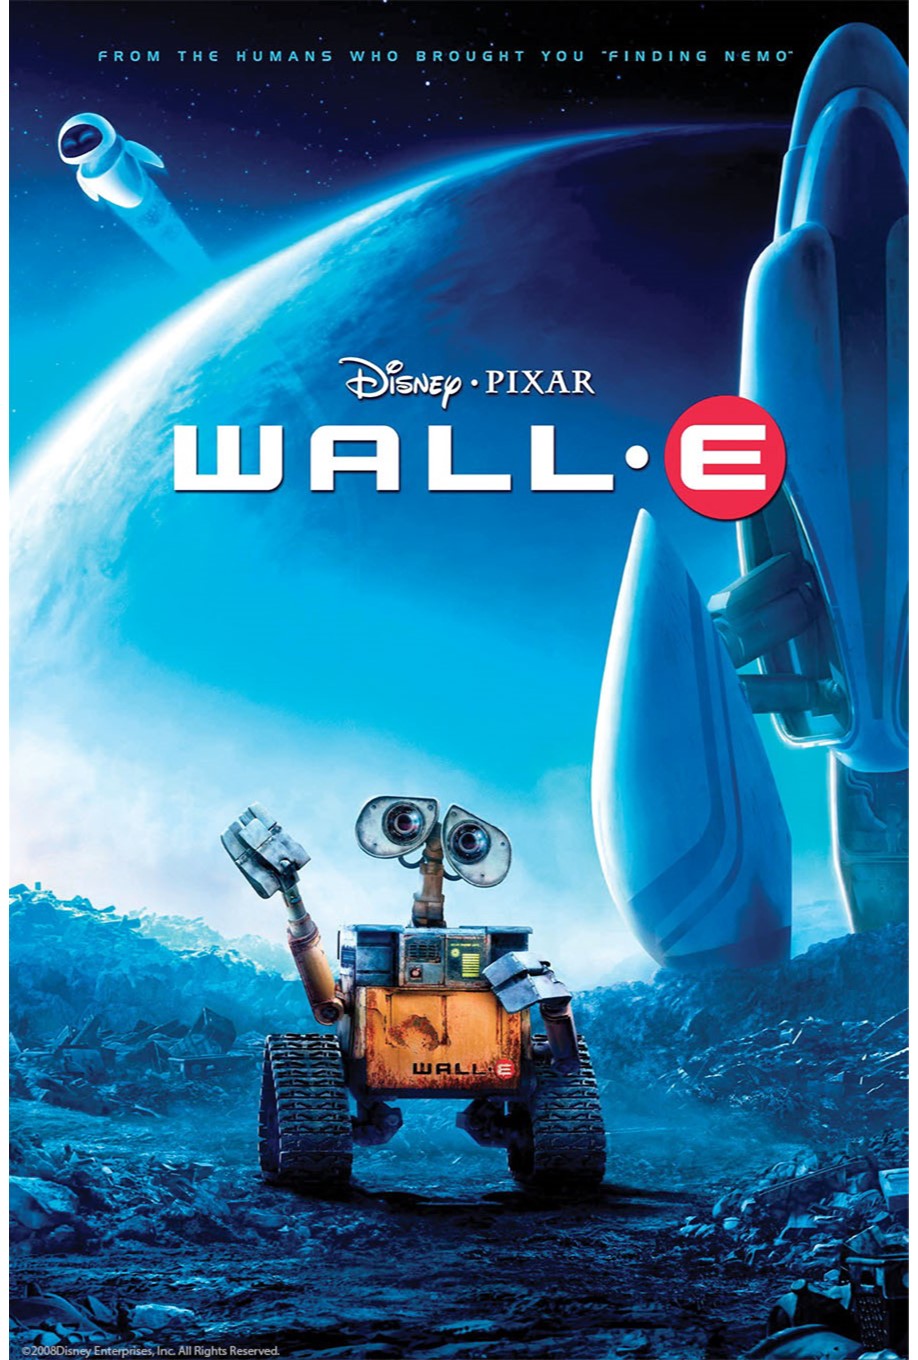 Film poster for WALL-E